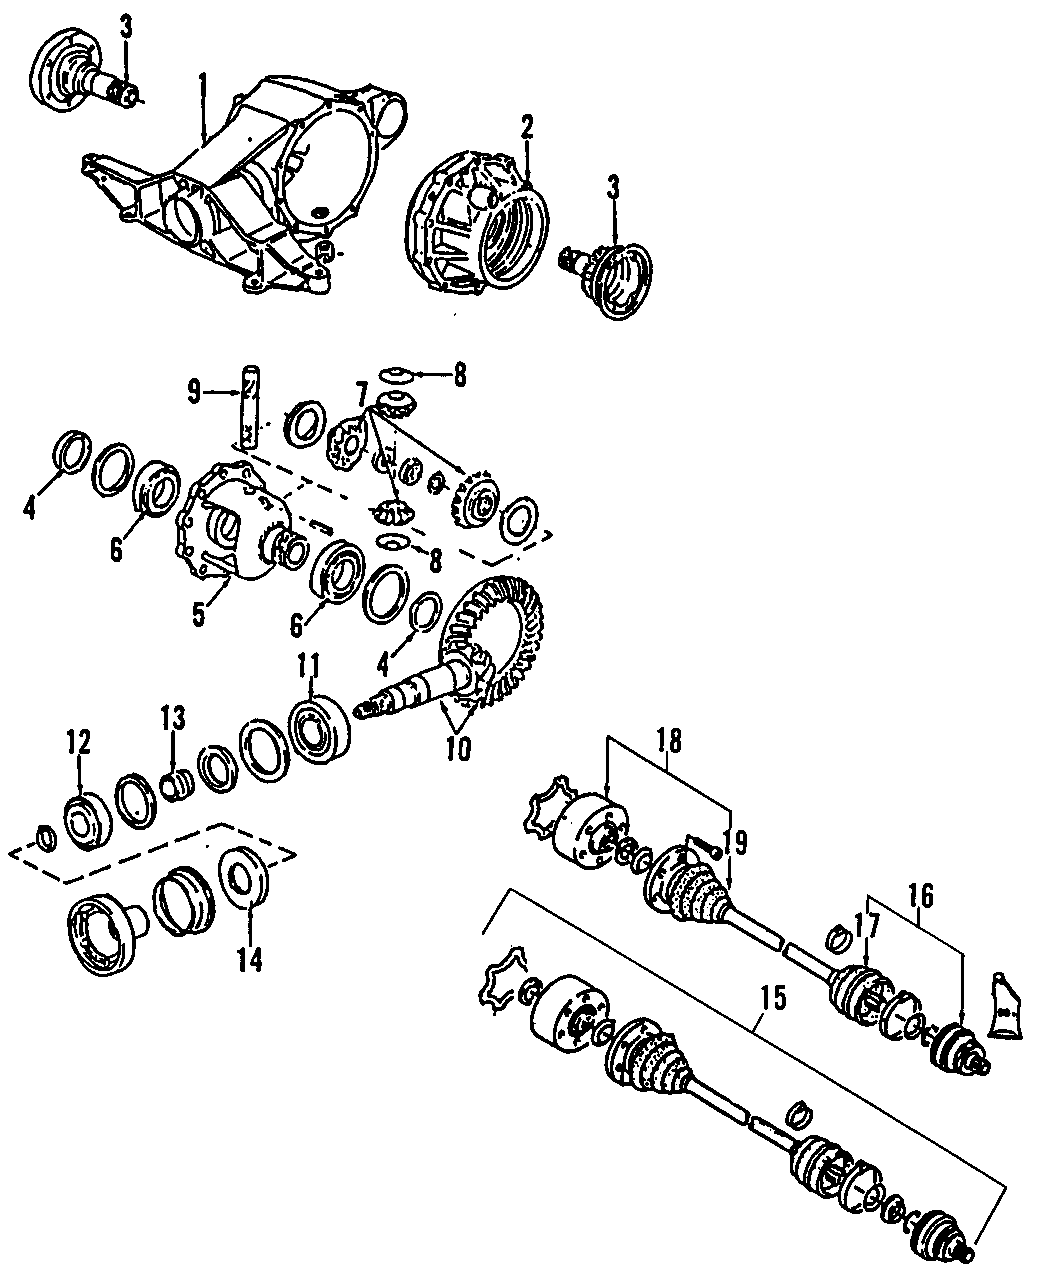 6DRIVE AXLES. REAR AXLE. AXLE SHAFTS & JOINTS. DIFFERENTIAL. PROPELLER SHAFT.https://images.simplepart.com/images/parts/motor/fullsize/F257120.png